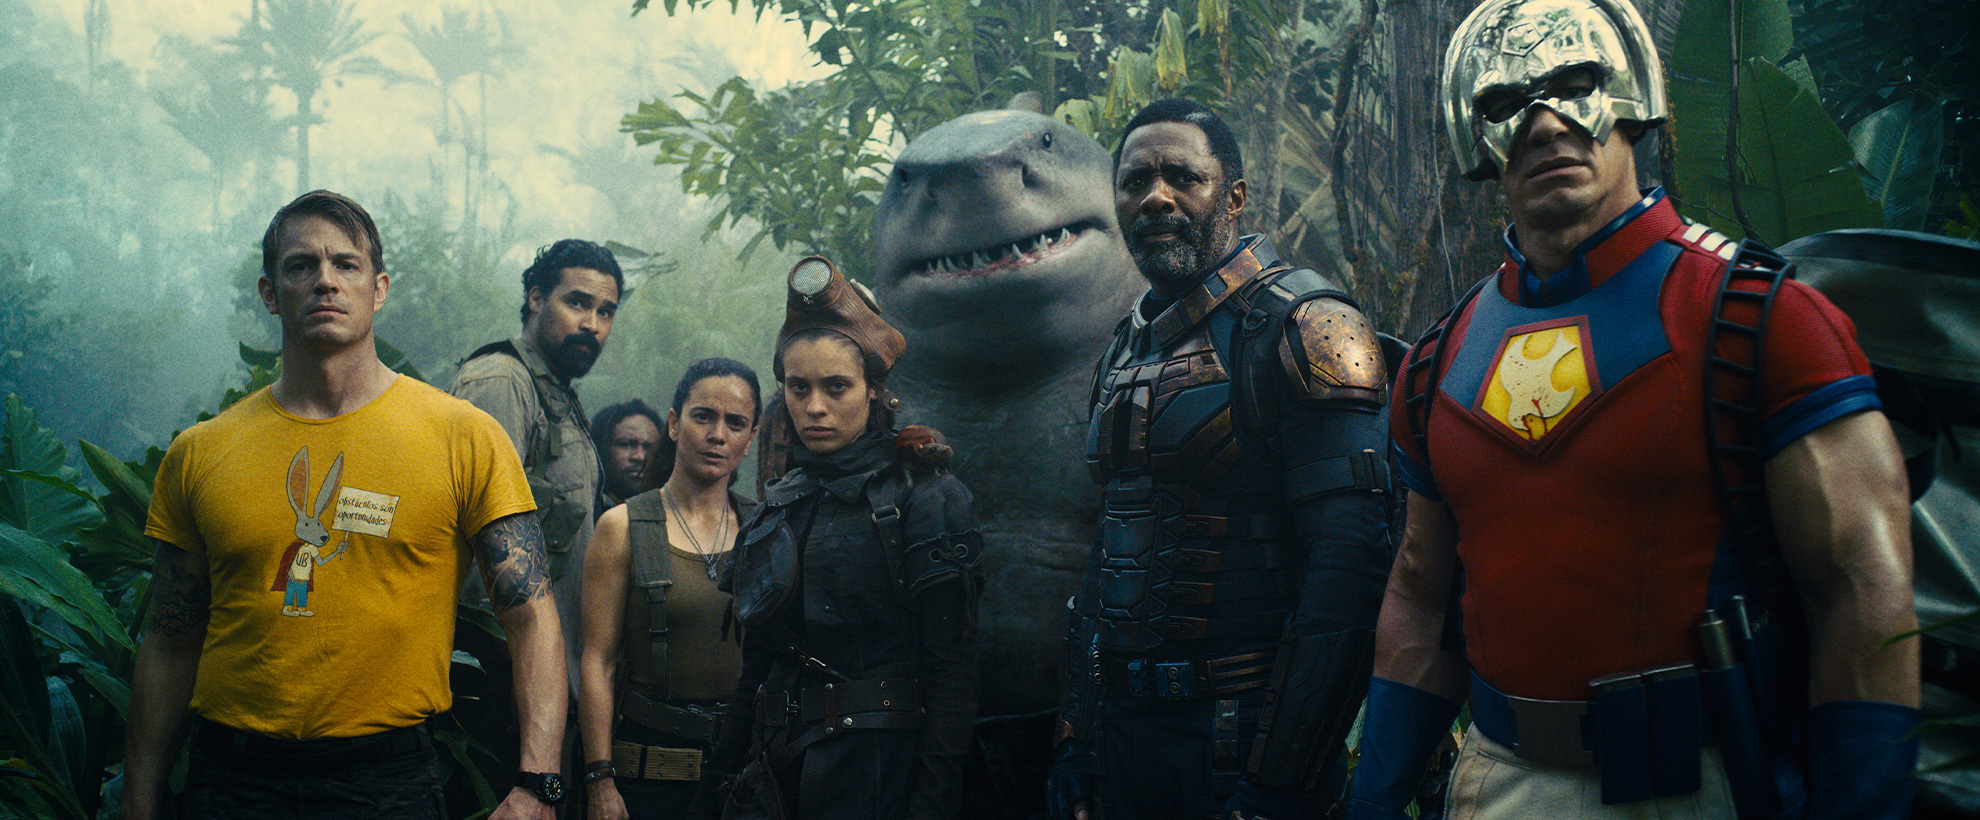 The ensemble cast of the Suicide Squad, standing in a forest, all staring down the camera